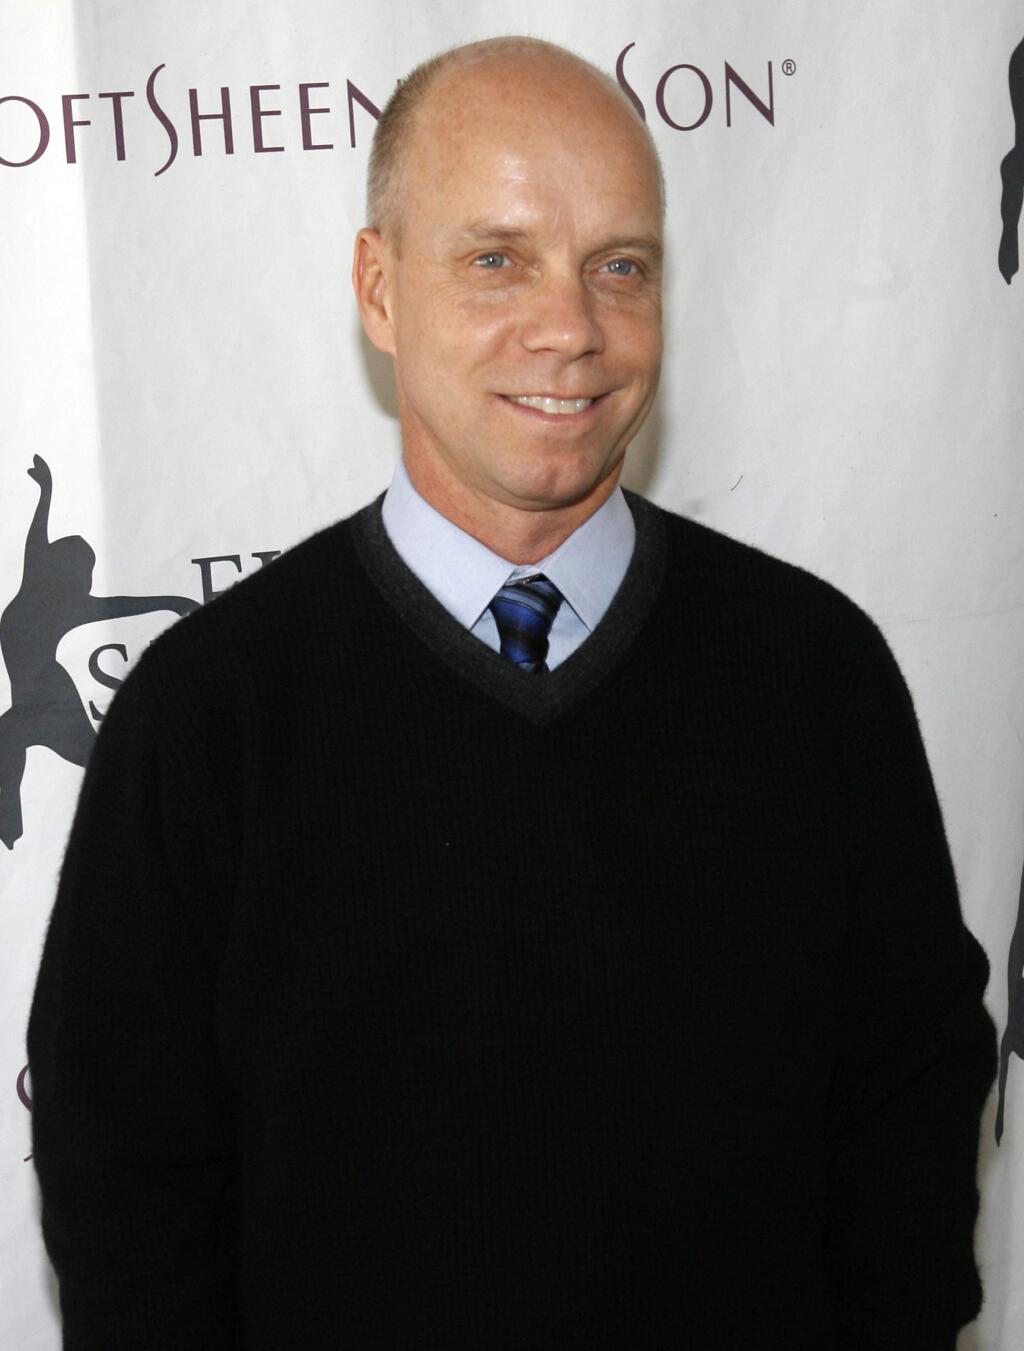 FILE - In this April 9, 2007 file photo, former Olympic figure skating gold medalist Scott Hamilton arrives for Figure Skating In Harlem's annual gala 'Skating with the Stars' at Central Park's Wollman Rink in New York. Hamilton told People magazine for a story published online on Oct. 23, 2016, that he has been diagnosed with another brain tumor. (AP Photo/Jason DeCrow, File)